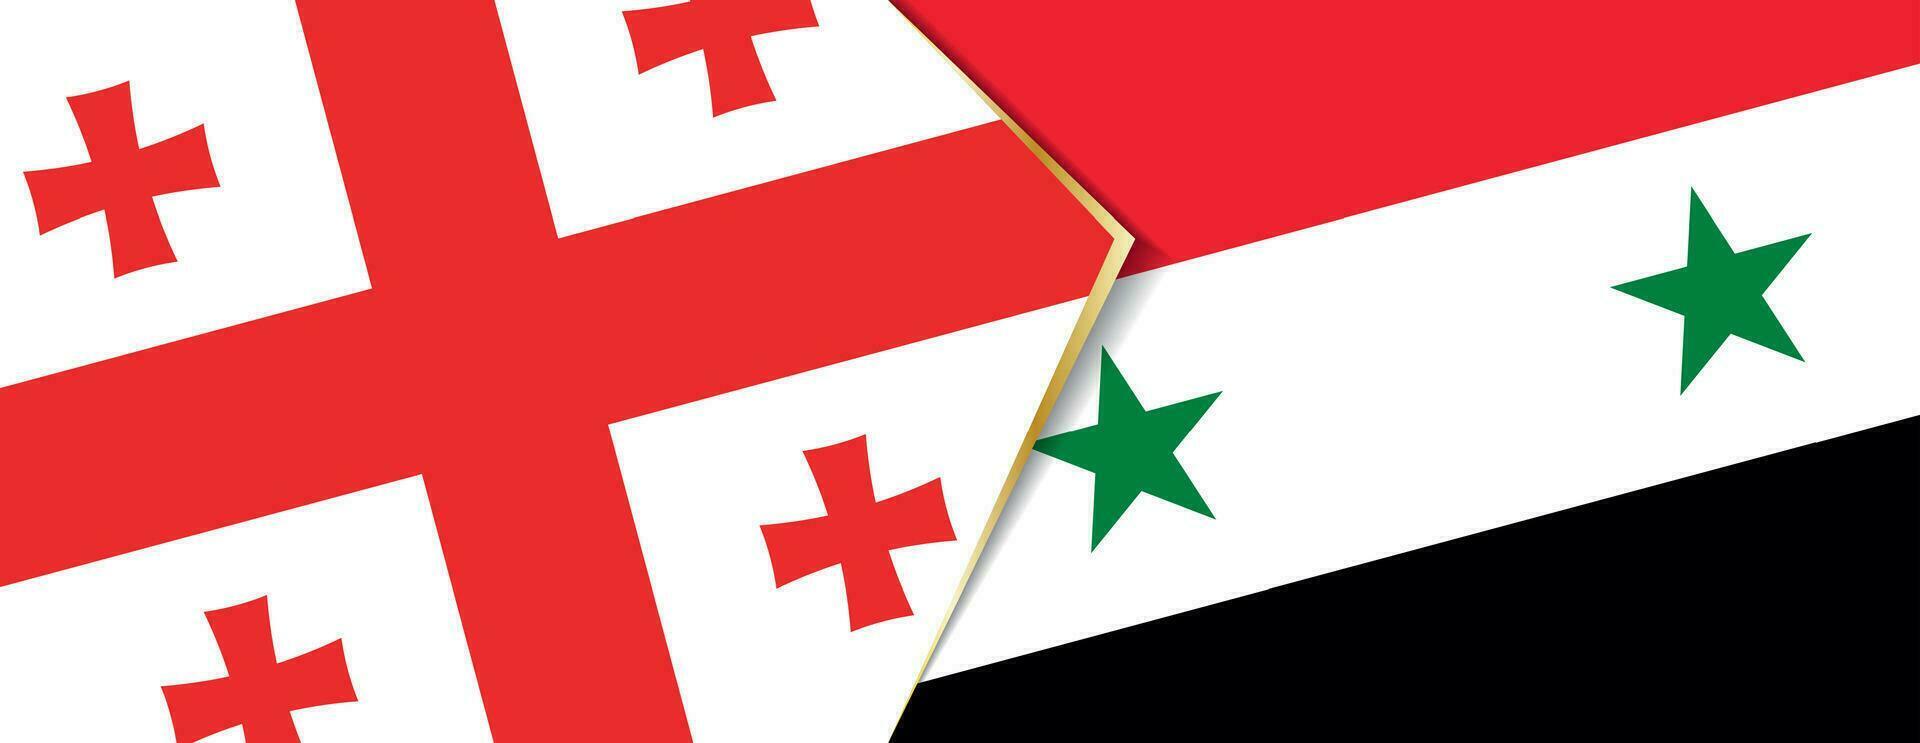 Georgia and Syria flags, two vector flags.